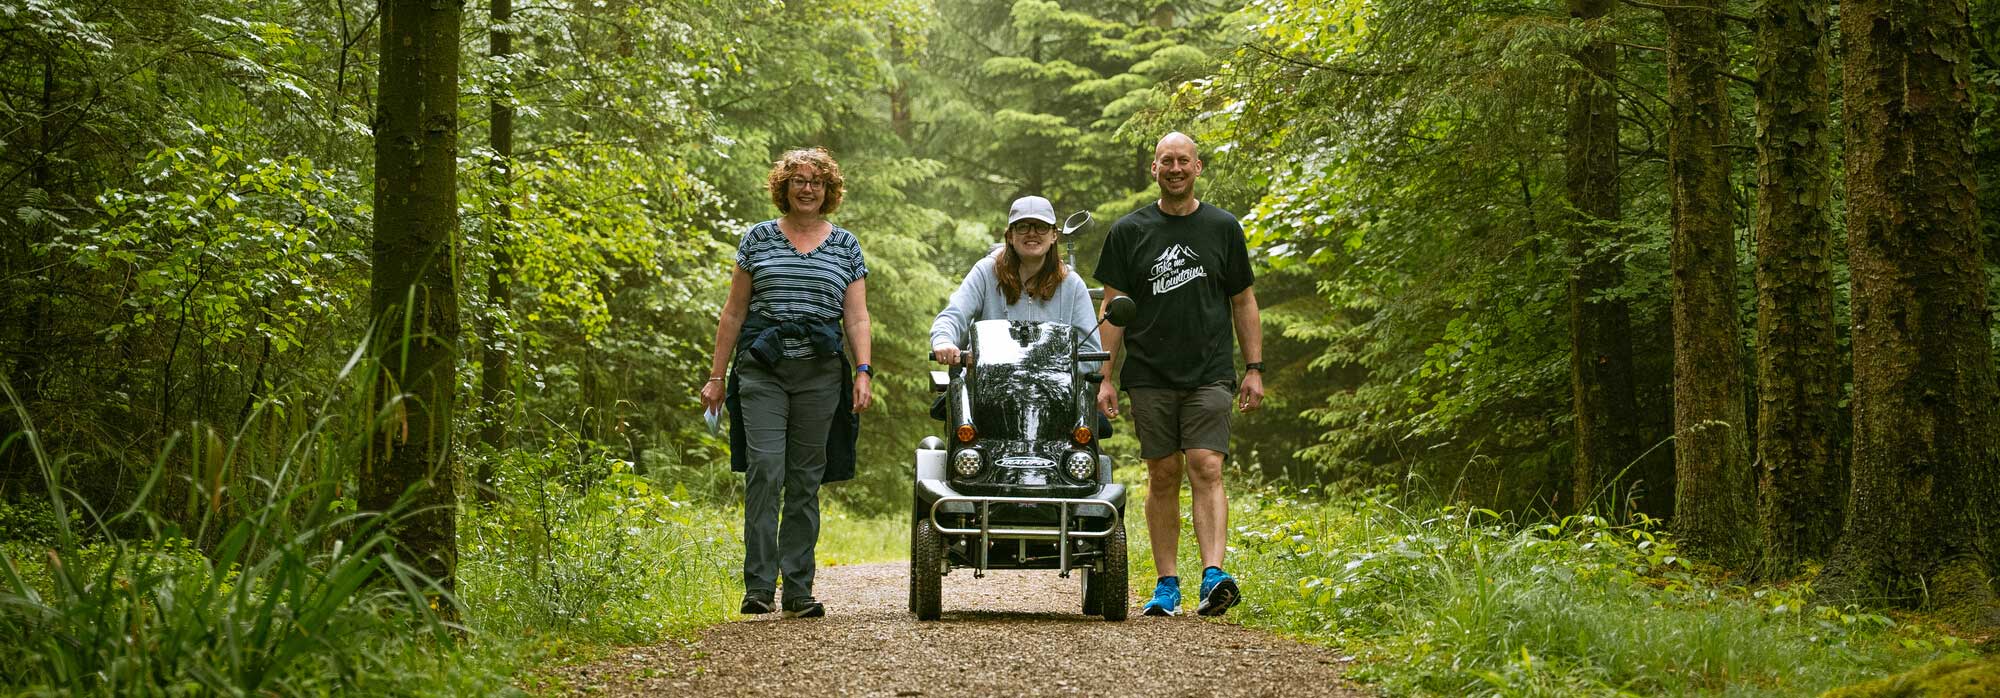 Three people heading down a woodland track. Two people are walking either side of another person using a tramper (all-terrain mobility scooter). Credit Hewitt & Walker.